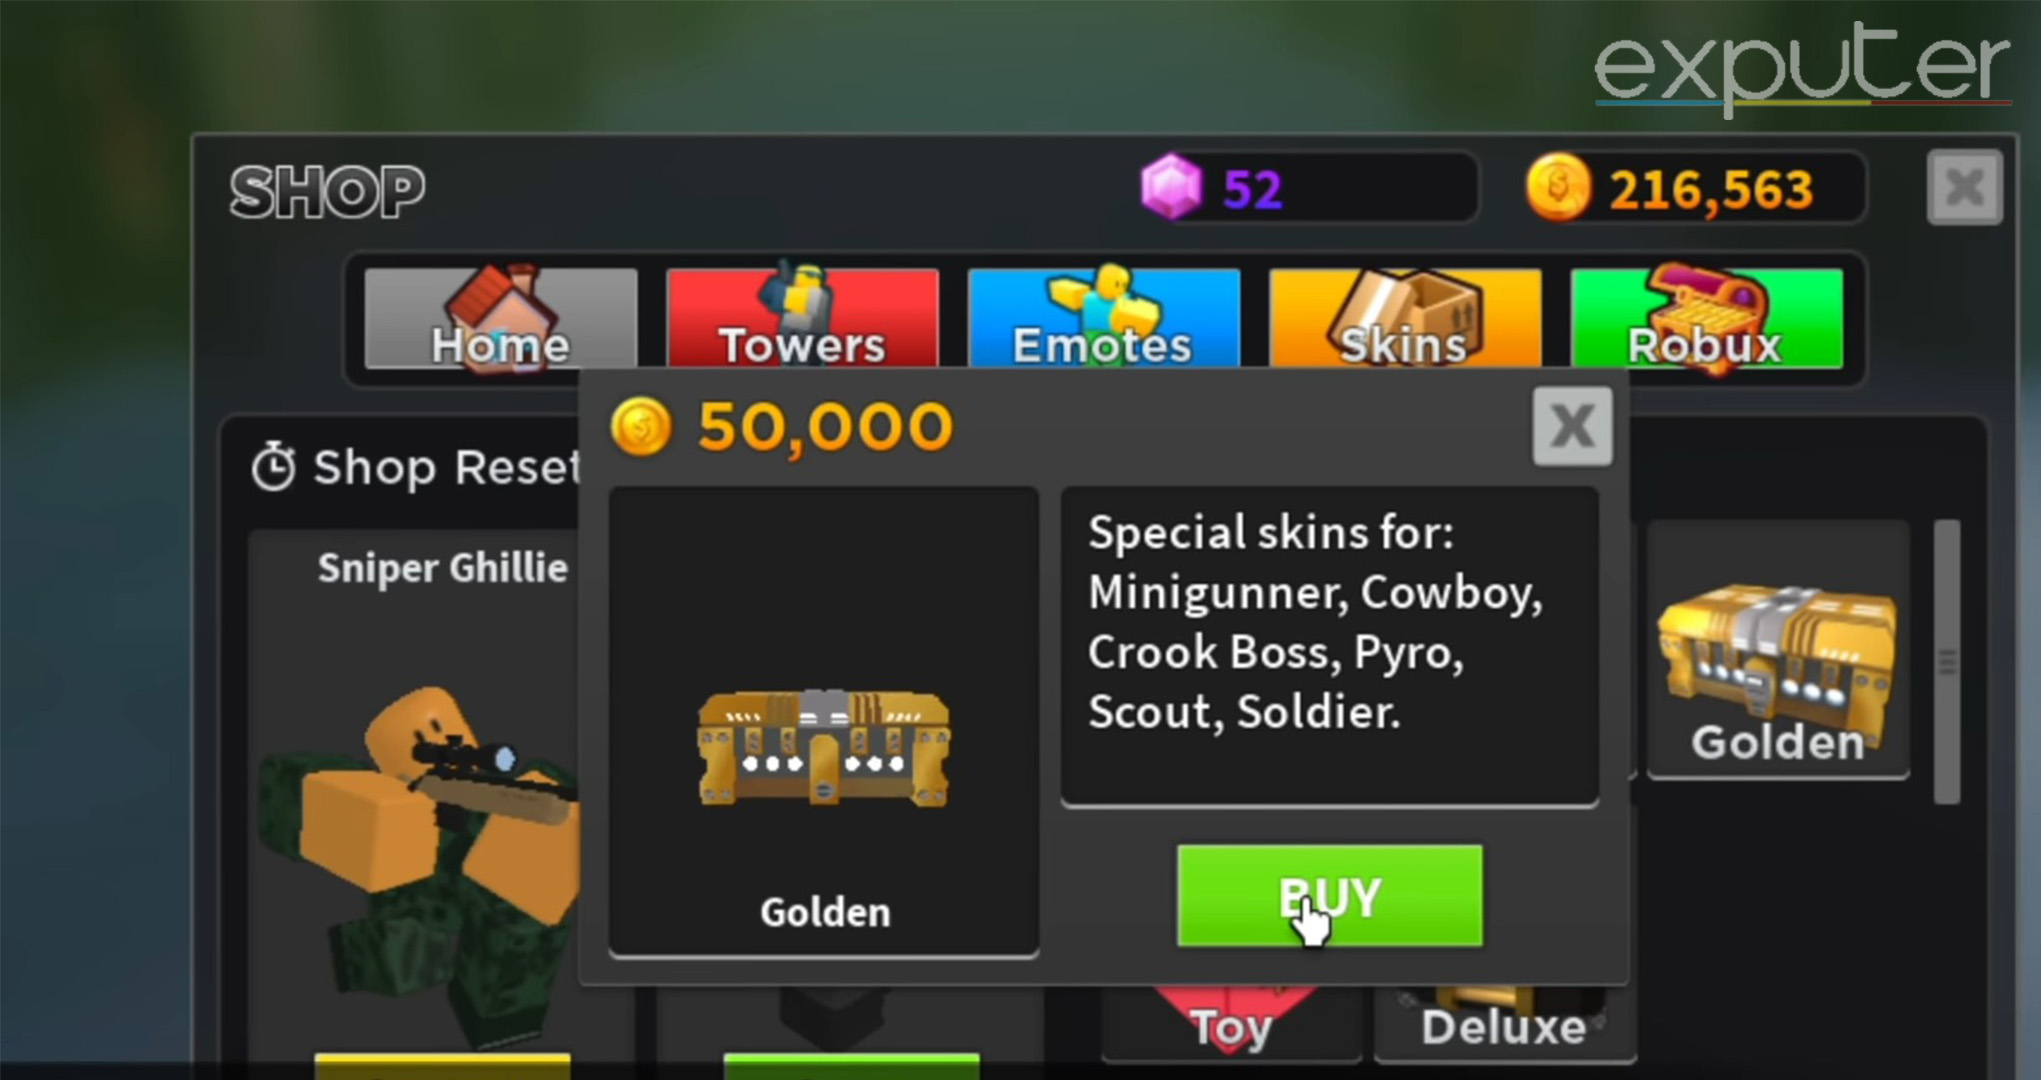 Preview of Golden Crate items